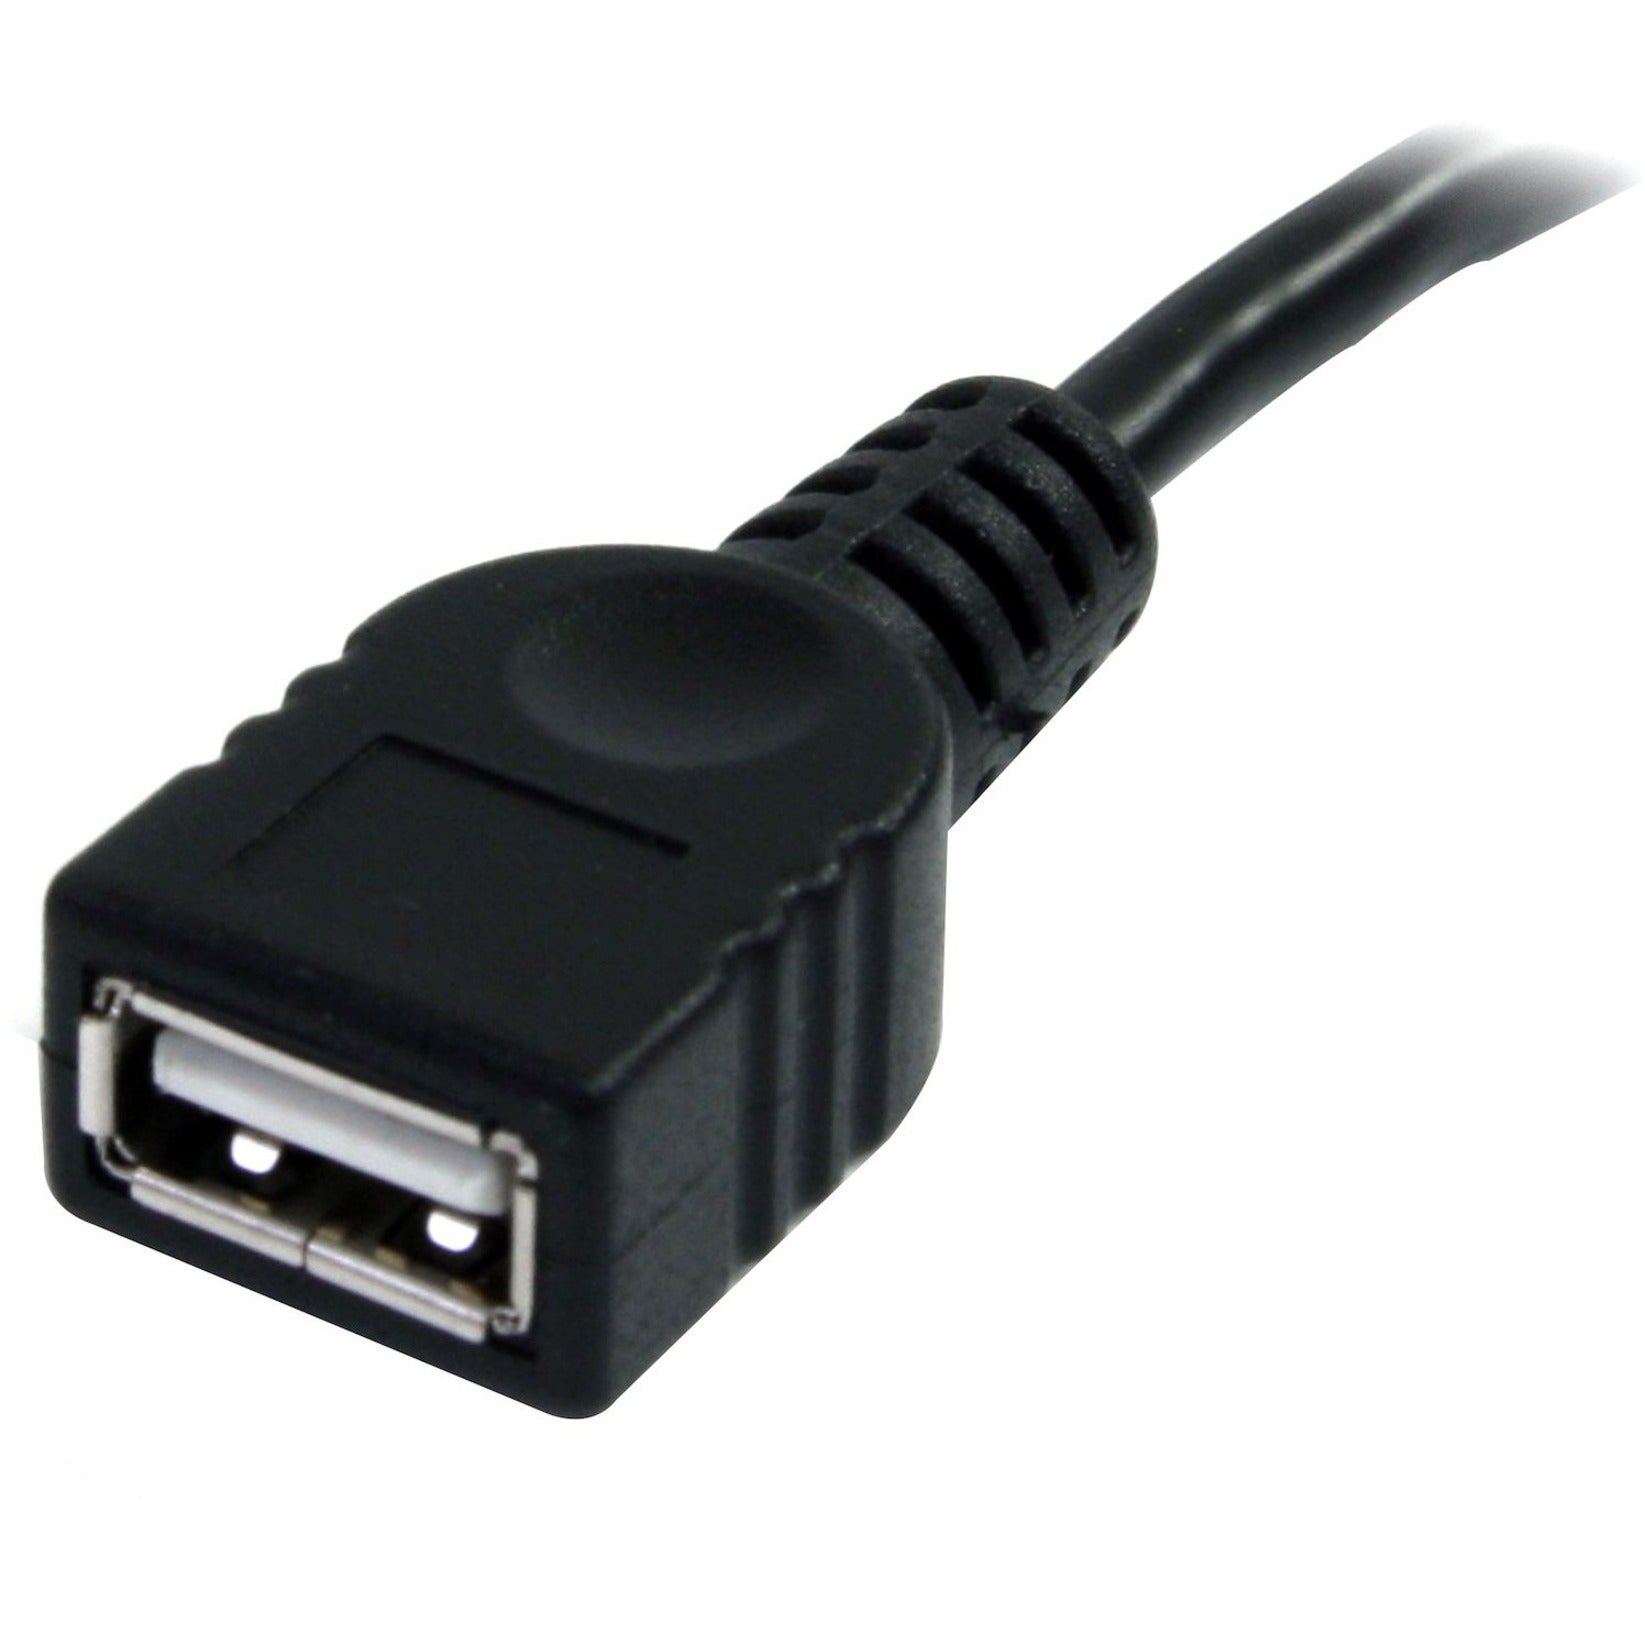 StarTech.com USBEXTAA3BK 3 ft Black USB 2.0 Extension Cable A to A - M/F, Flexible, Molded, Strain Relief, 480 Mbit/s Data Transfer Rate